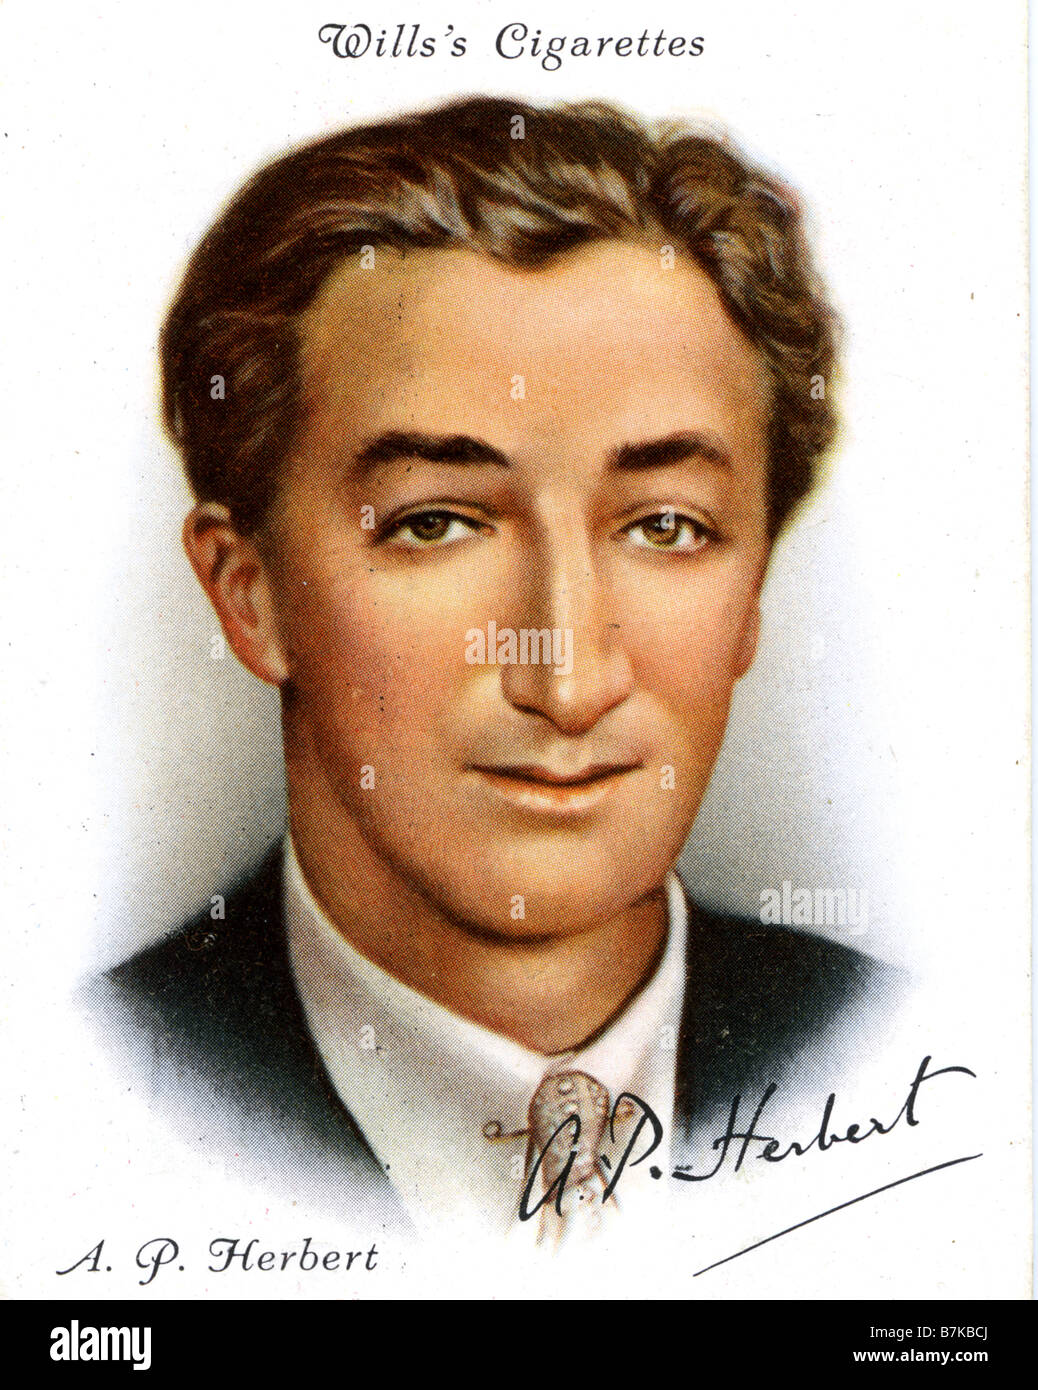 A.P.HERBERT  English writer and politician 1890-1971 on a 1930s cigarette card Stock Photo